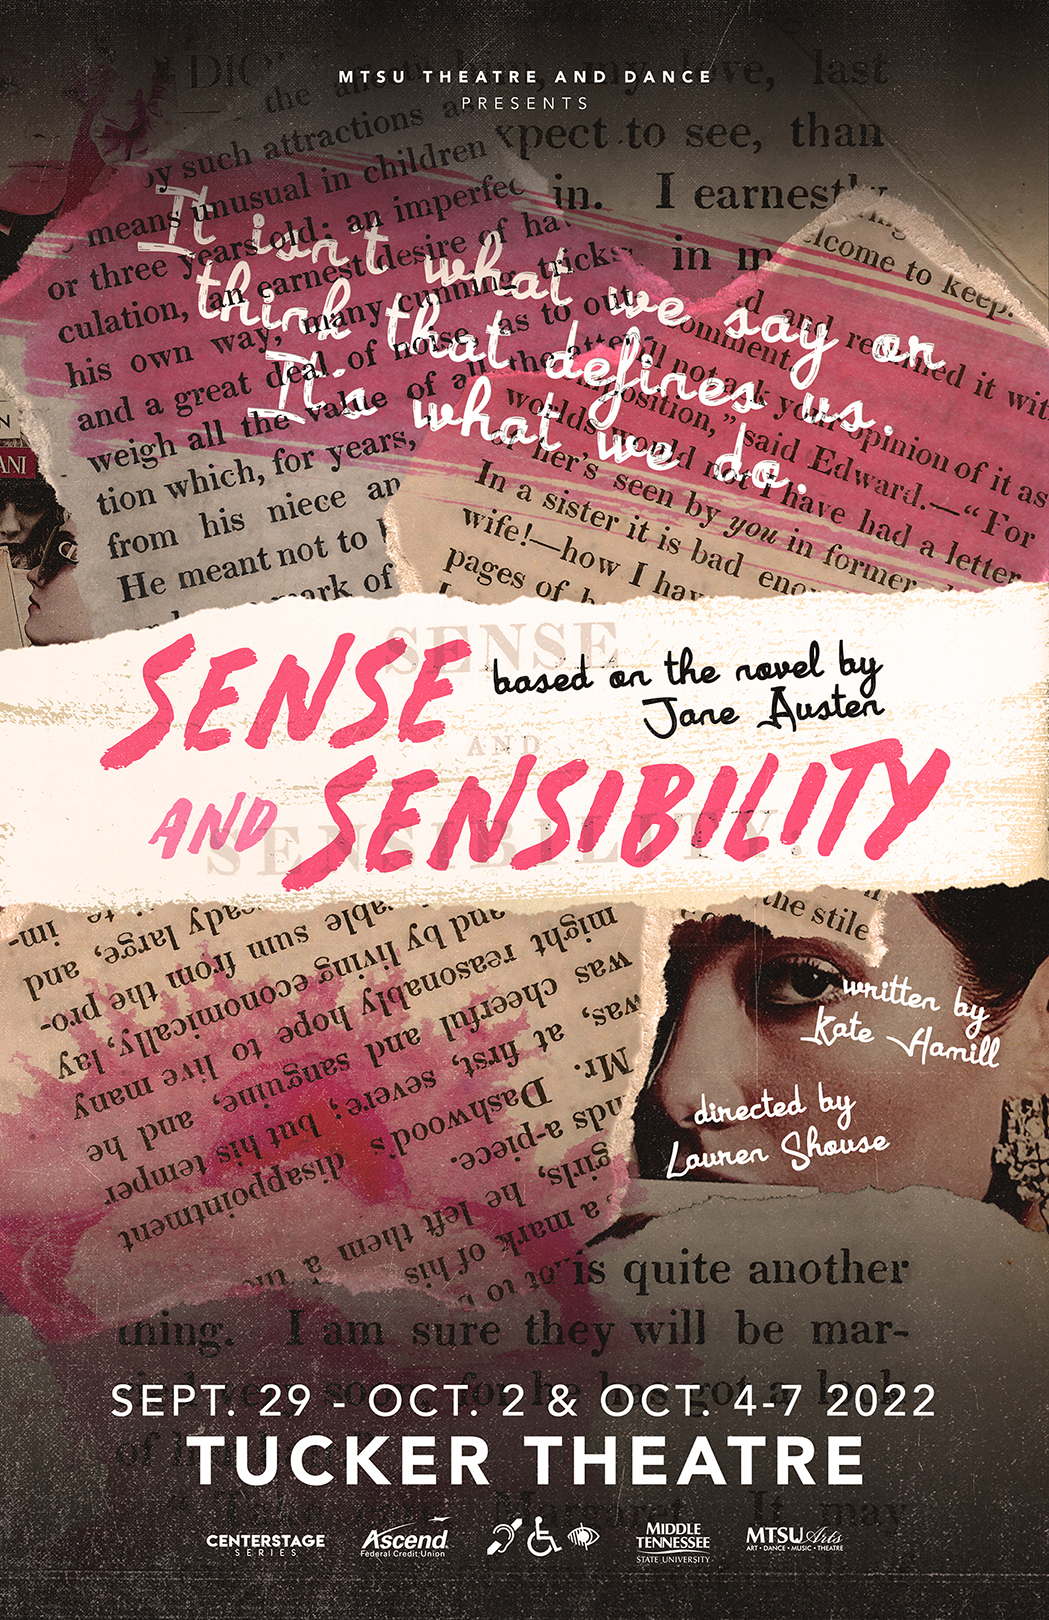 MTSU Theatre promotional poster for Sept. 29-Oct. 2 and Oct. 4-7 production of "Sense and Sensibility."